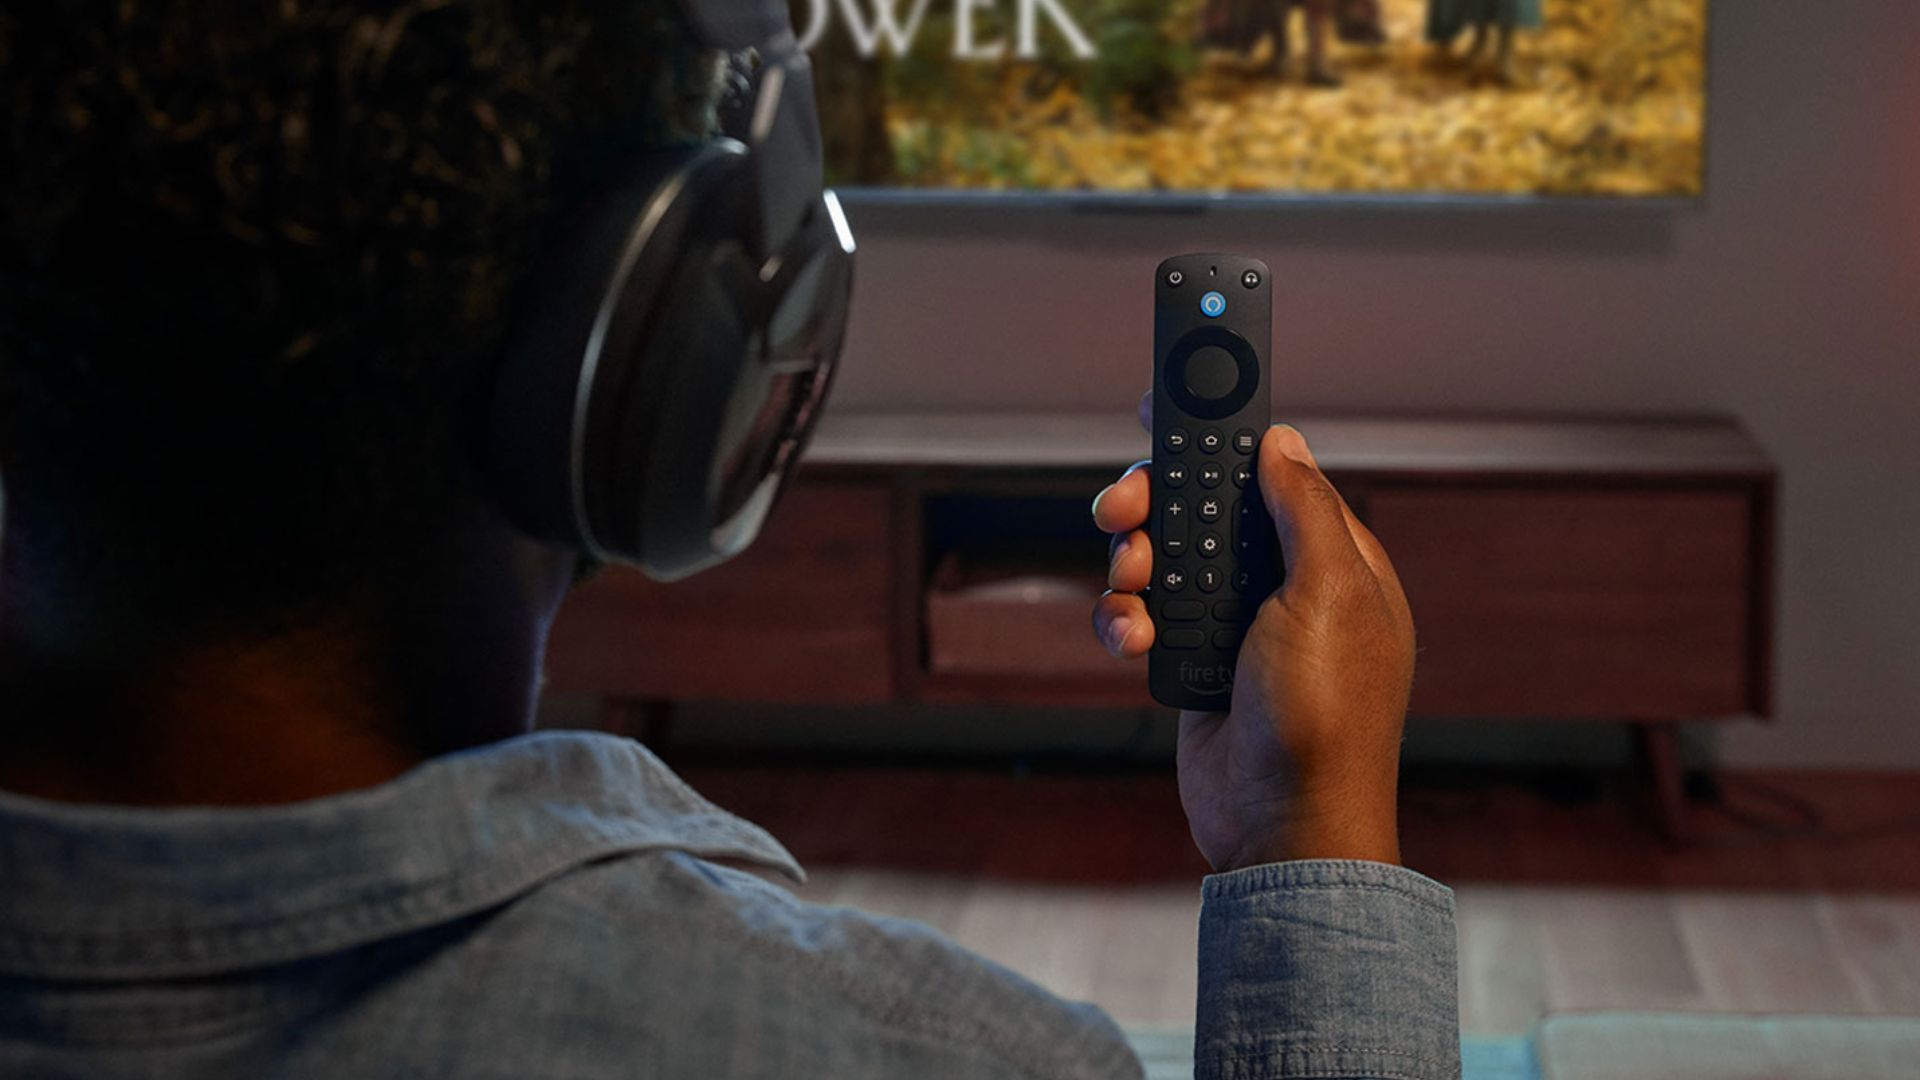 Man sitting infront of tv wearing headphones while holding an Amazon Fire TV Stick remote-1